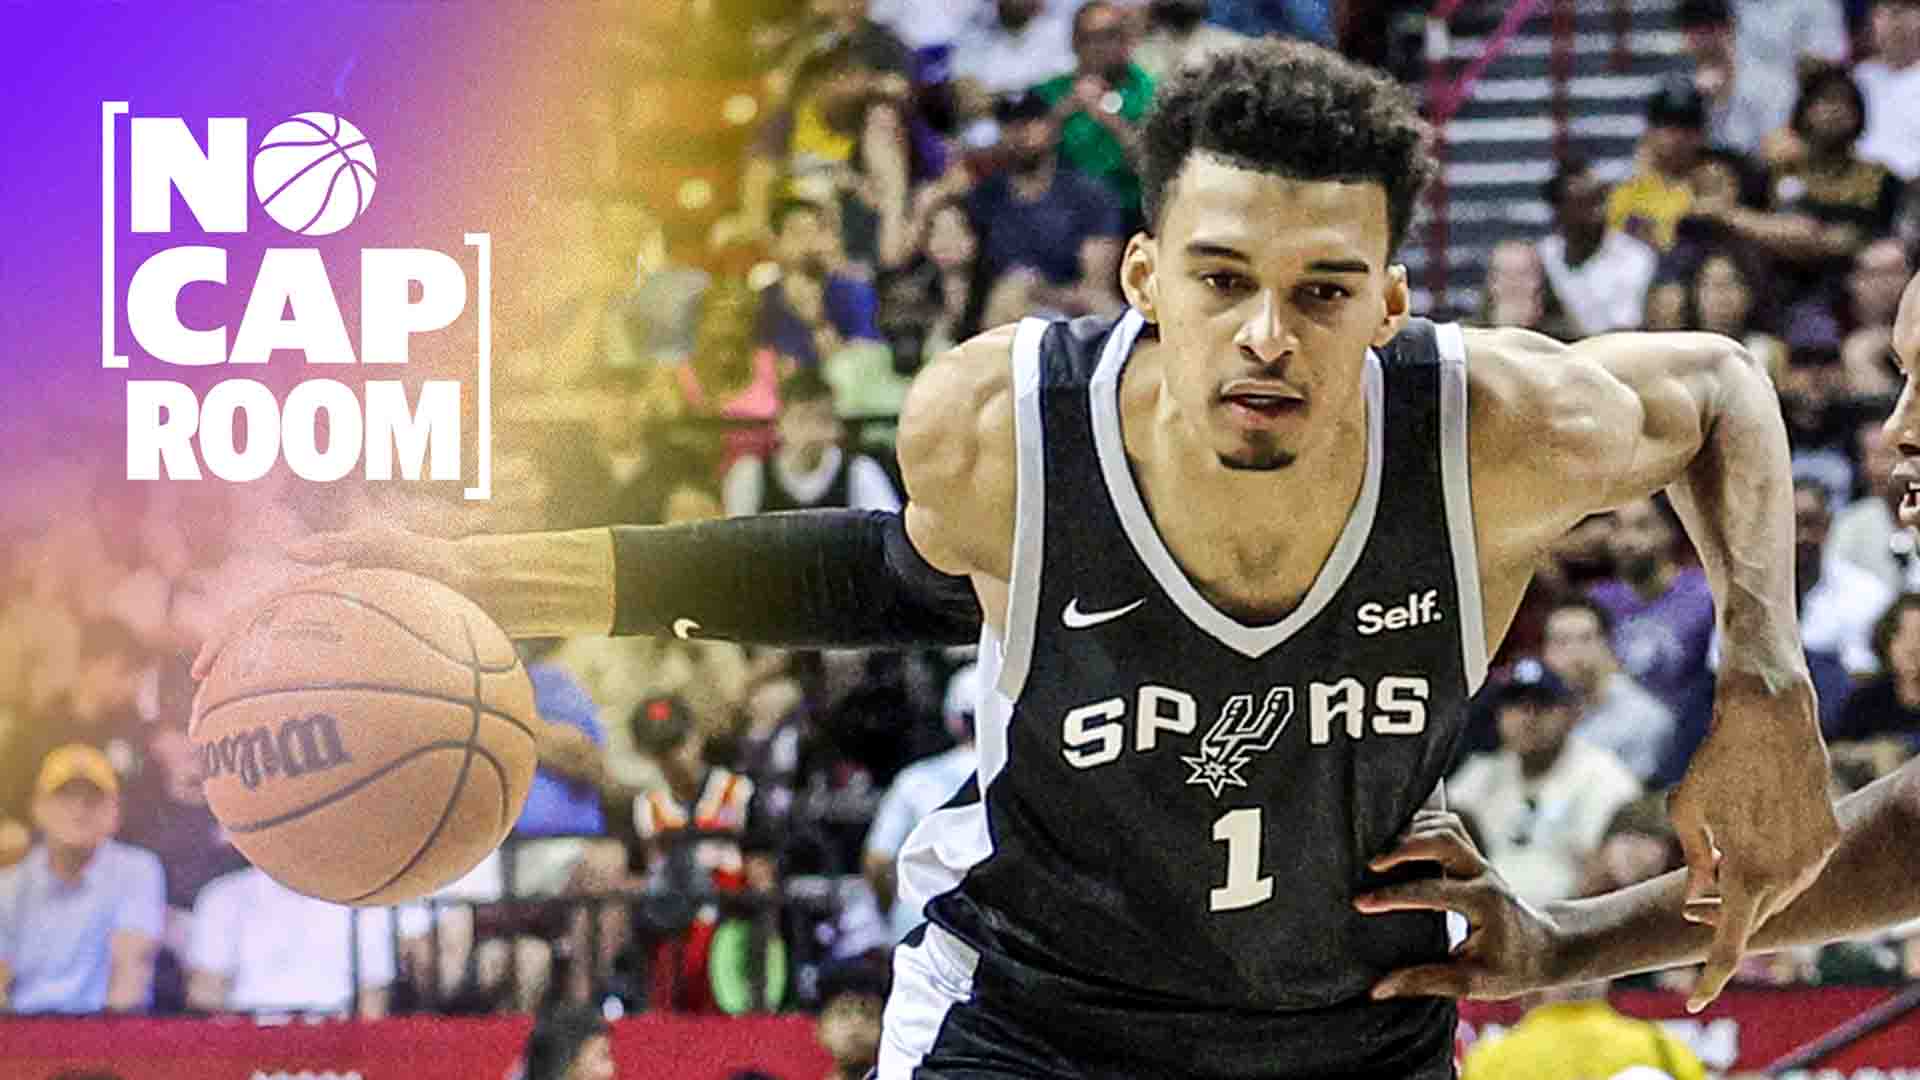 What’s realistic for the Spurs in Victor Wembanyama’s rookie season? | No Cap Room